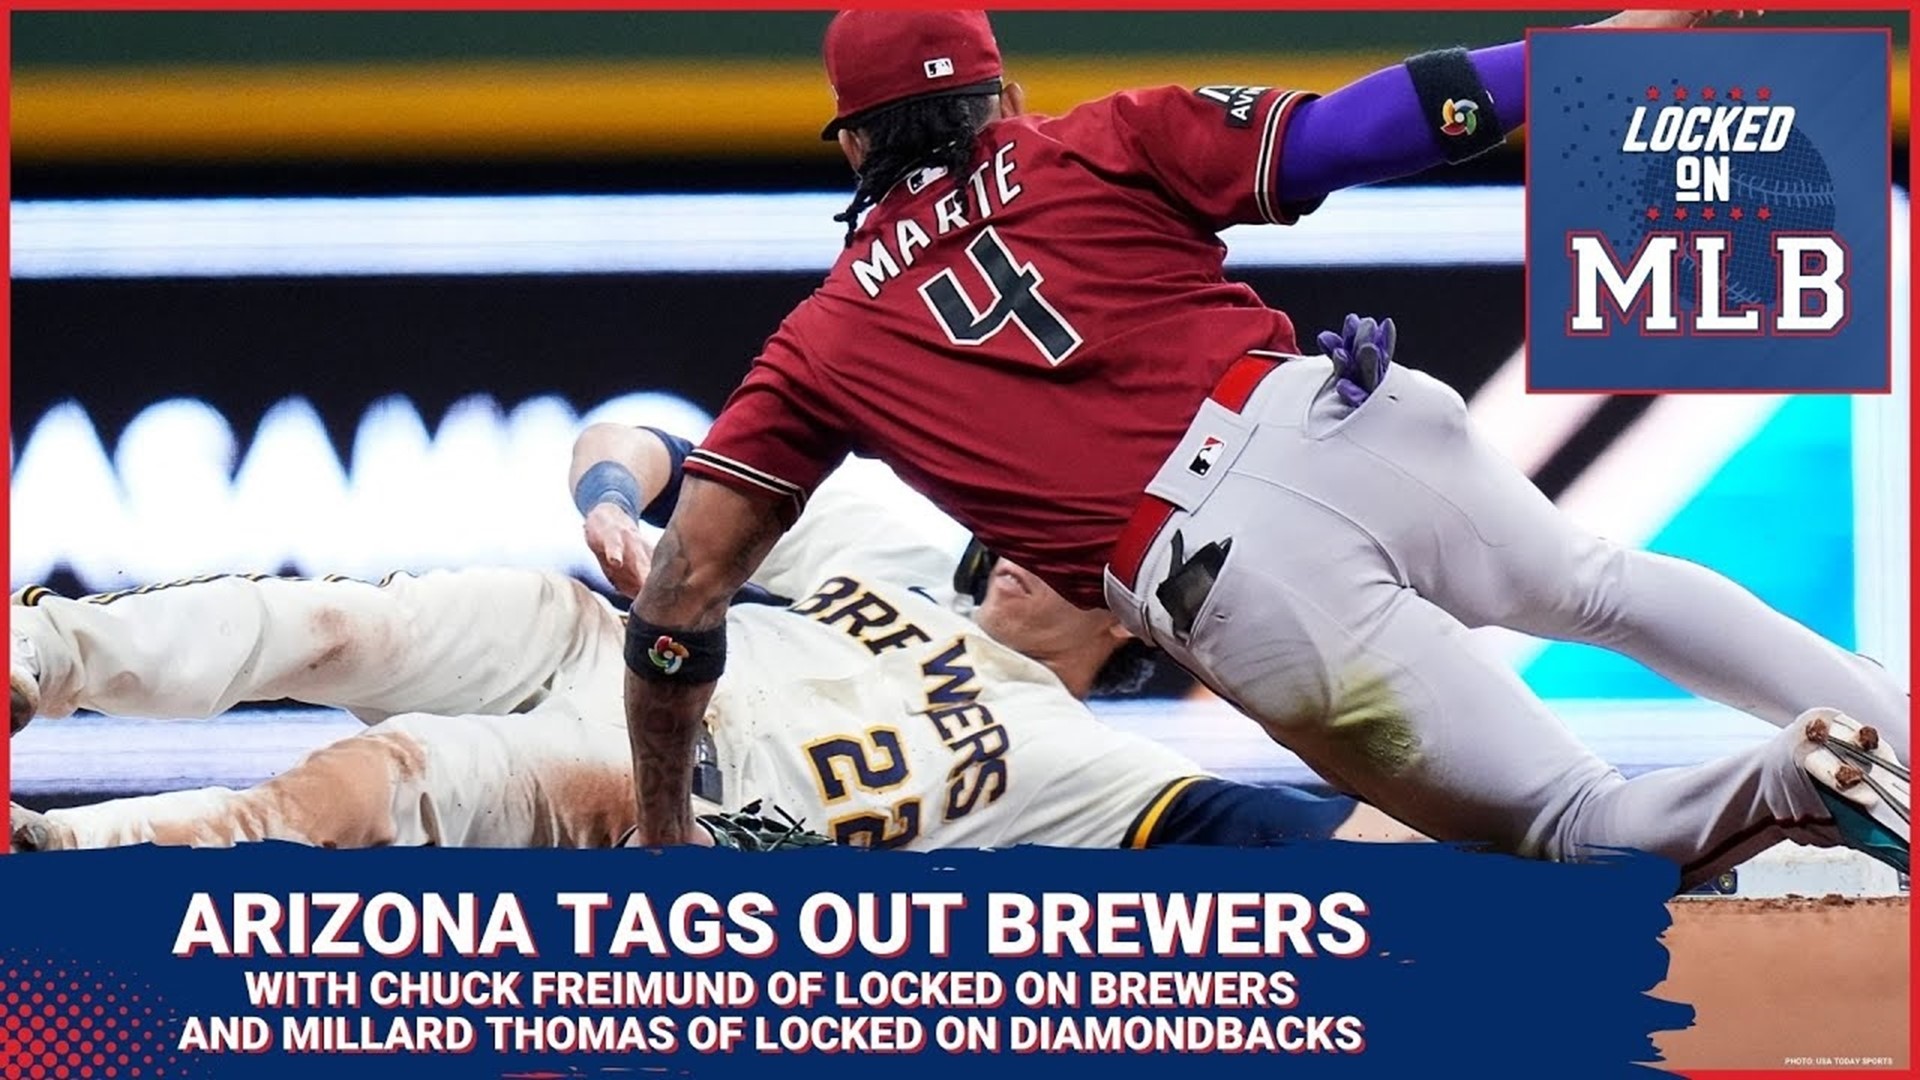 The Brewers took an early 3-0 lead on the Diamondbacks but Arizona powered back to win the 6-3 final.